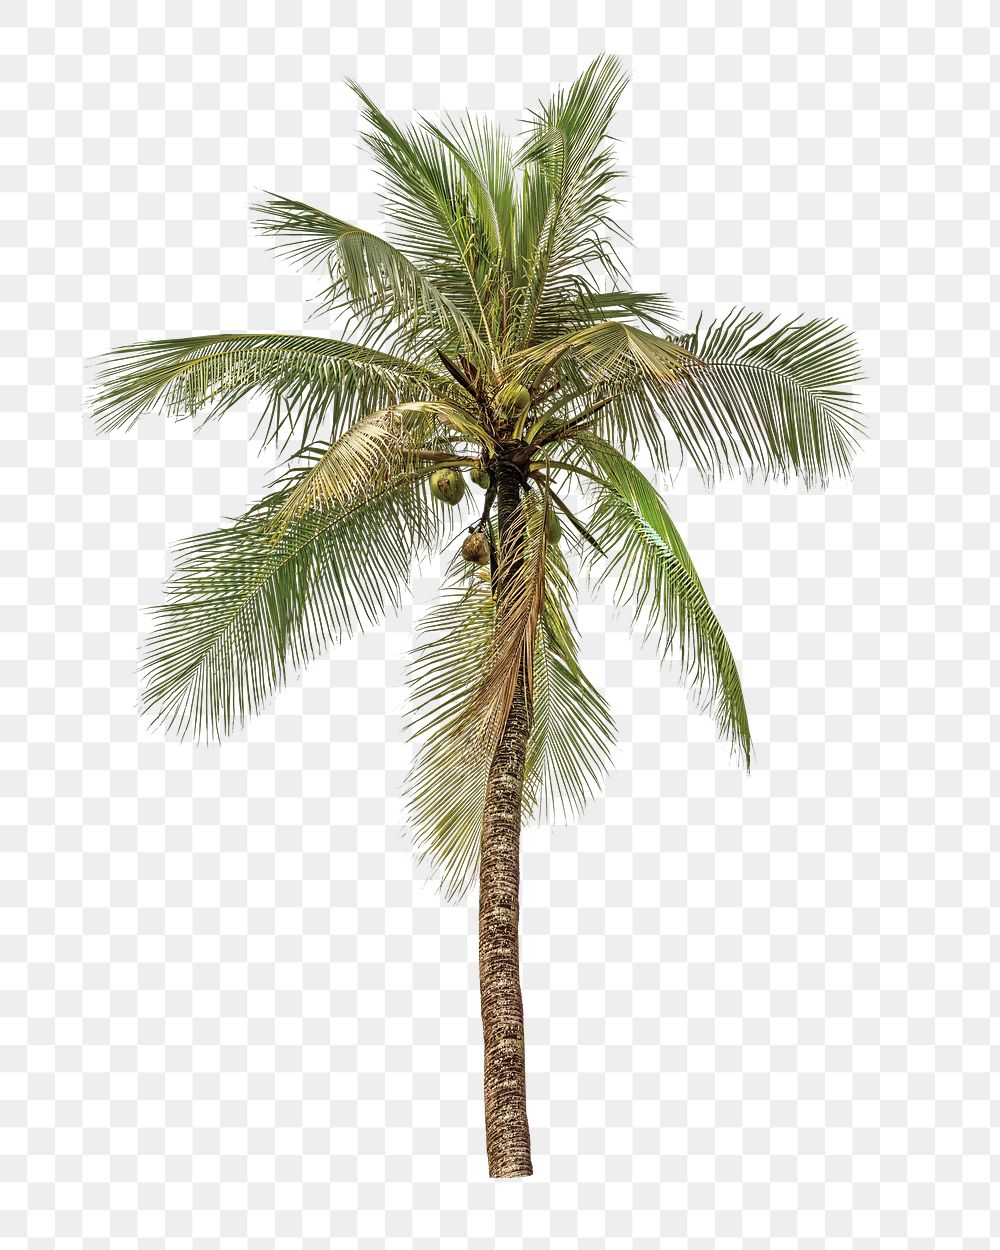 Coconut palm tree png, transparent background